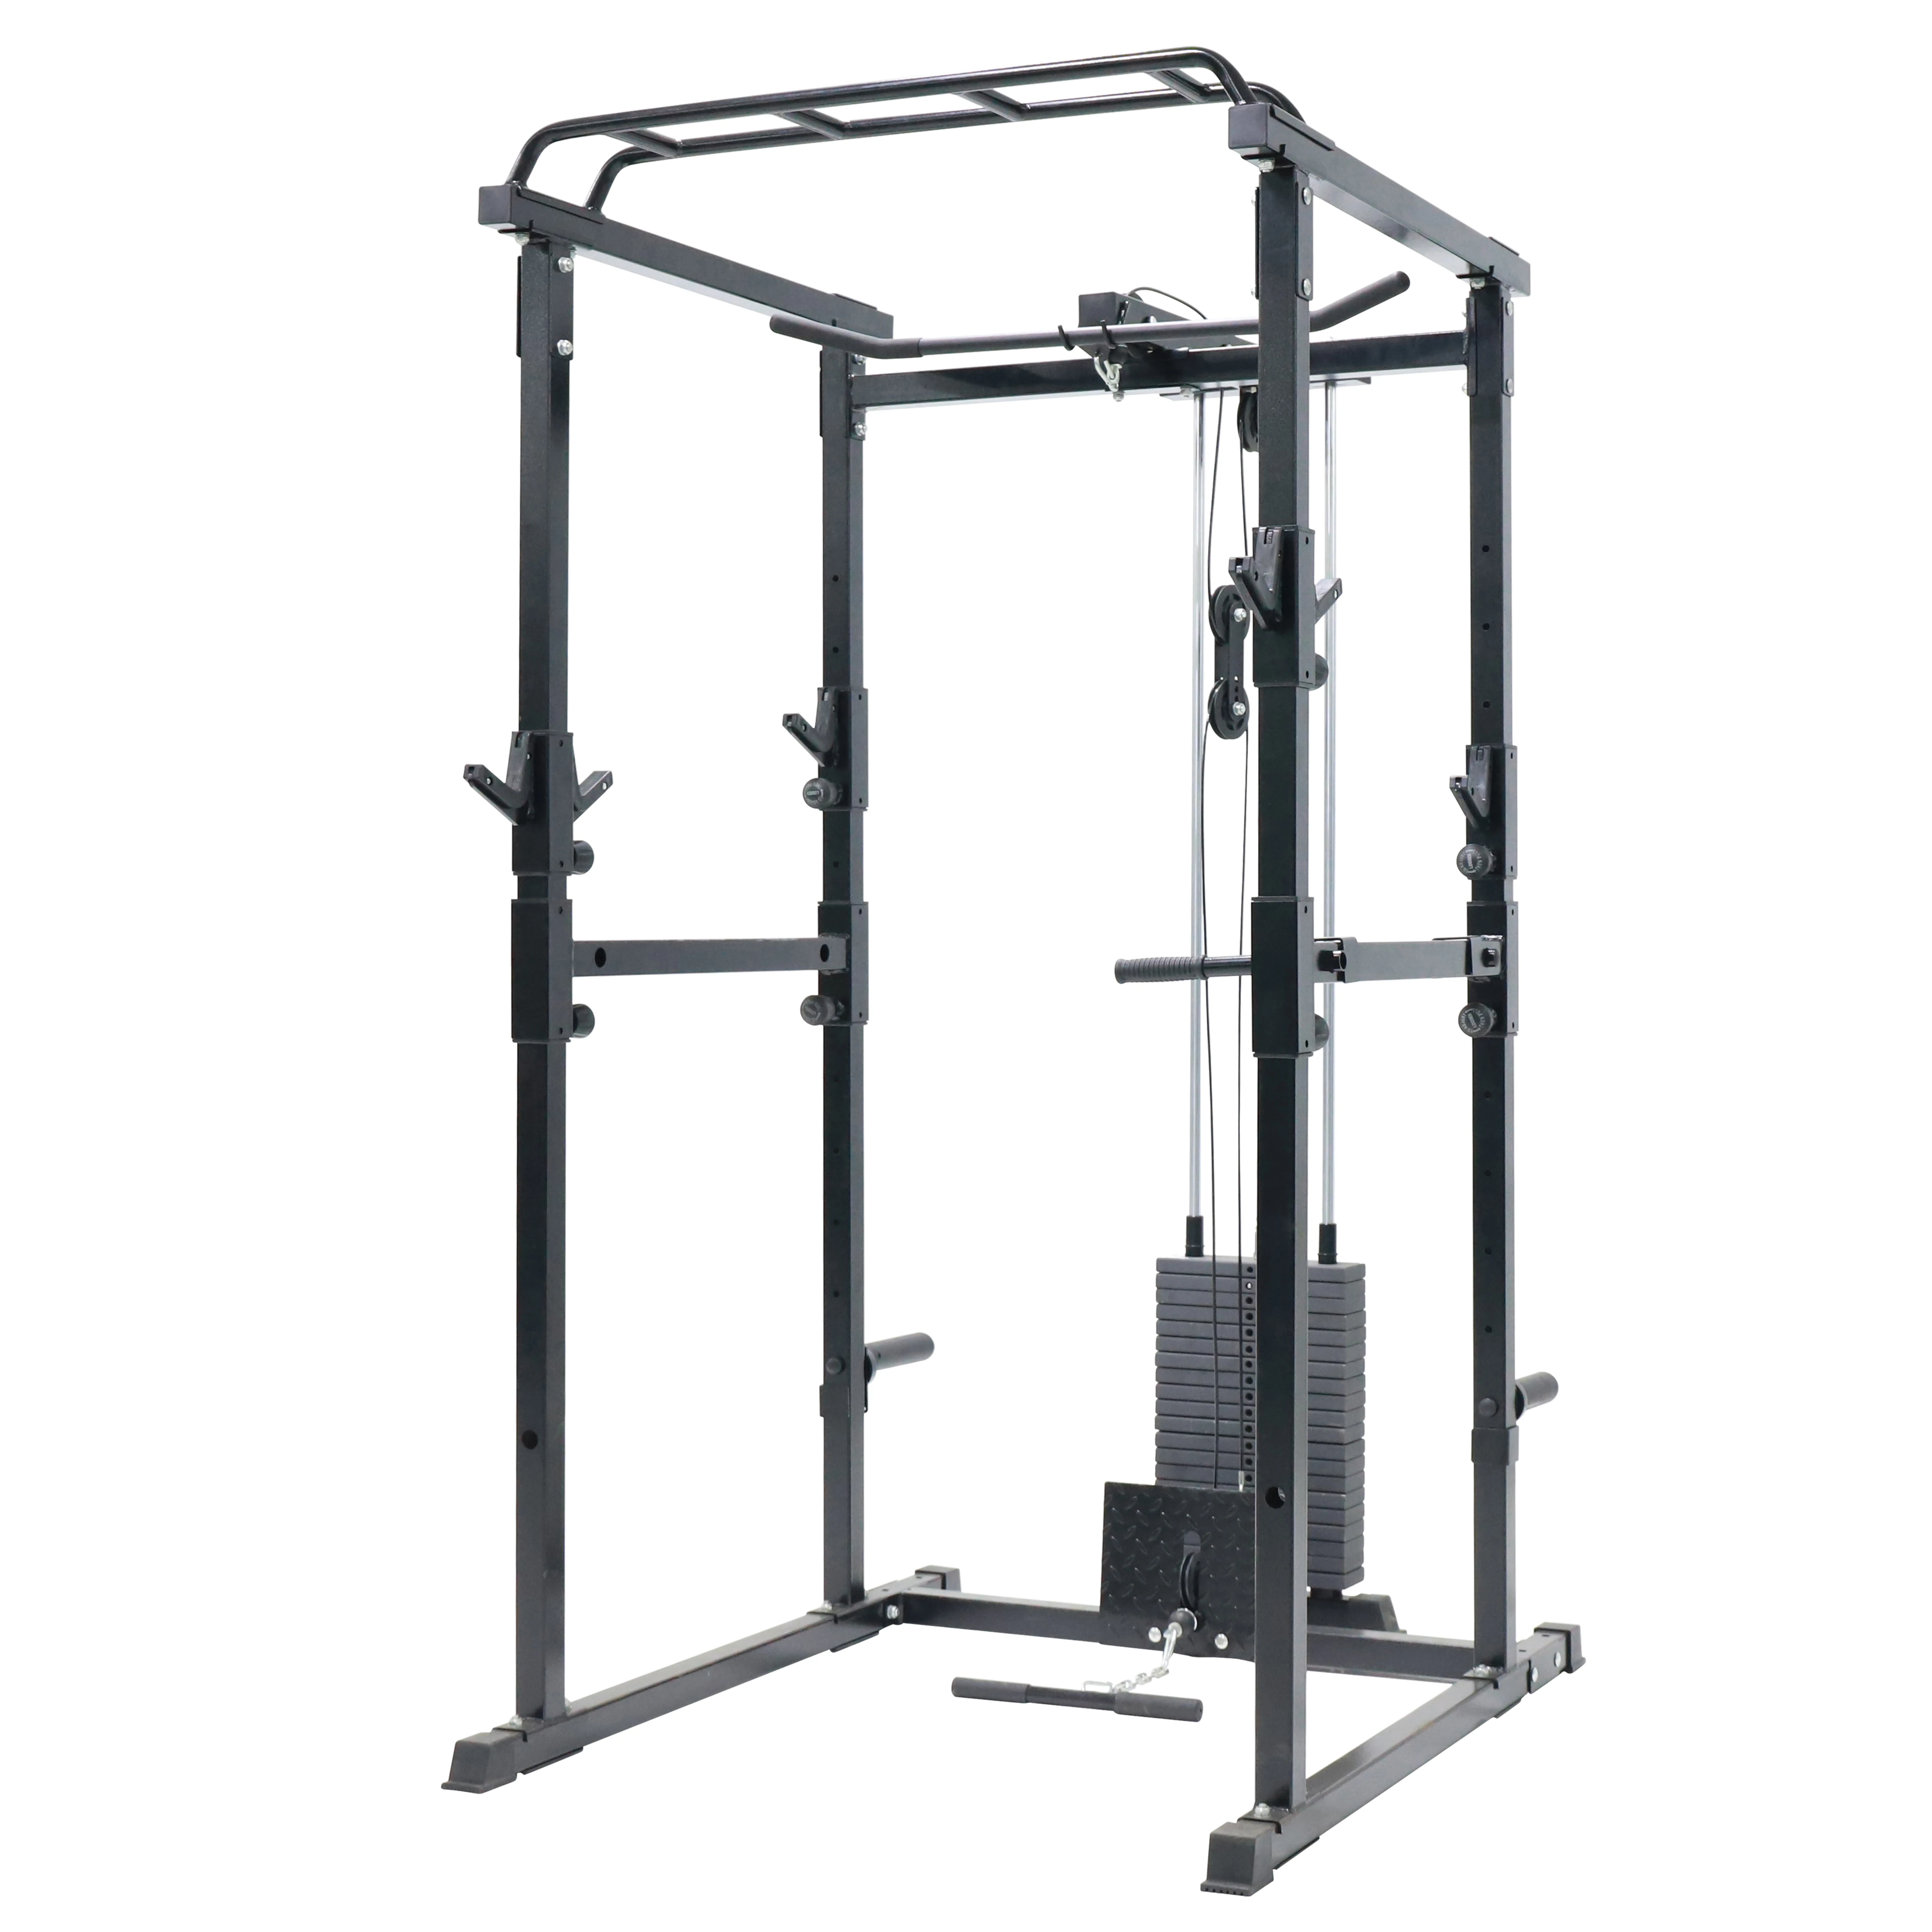 

RTS Squat Rack Stock in USA with 220lbs weight stack Q235 steel1000lbs Capacity Fitness Equipment MachinePower Cage